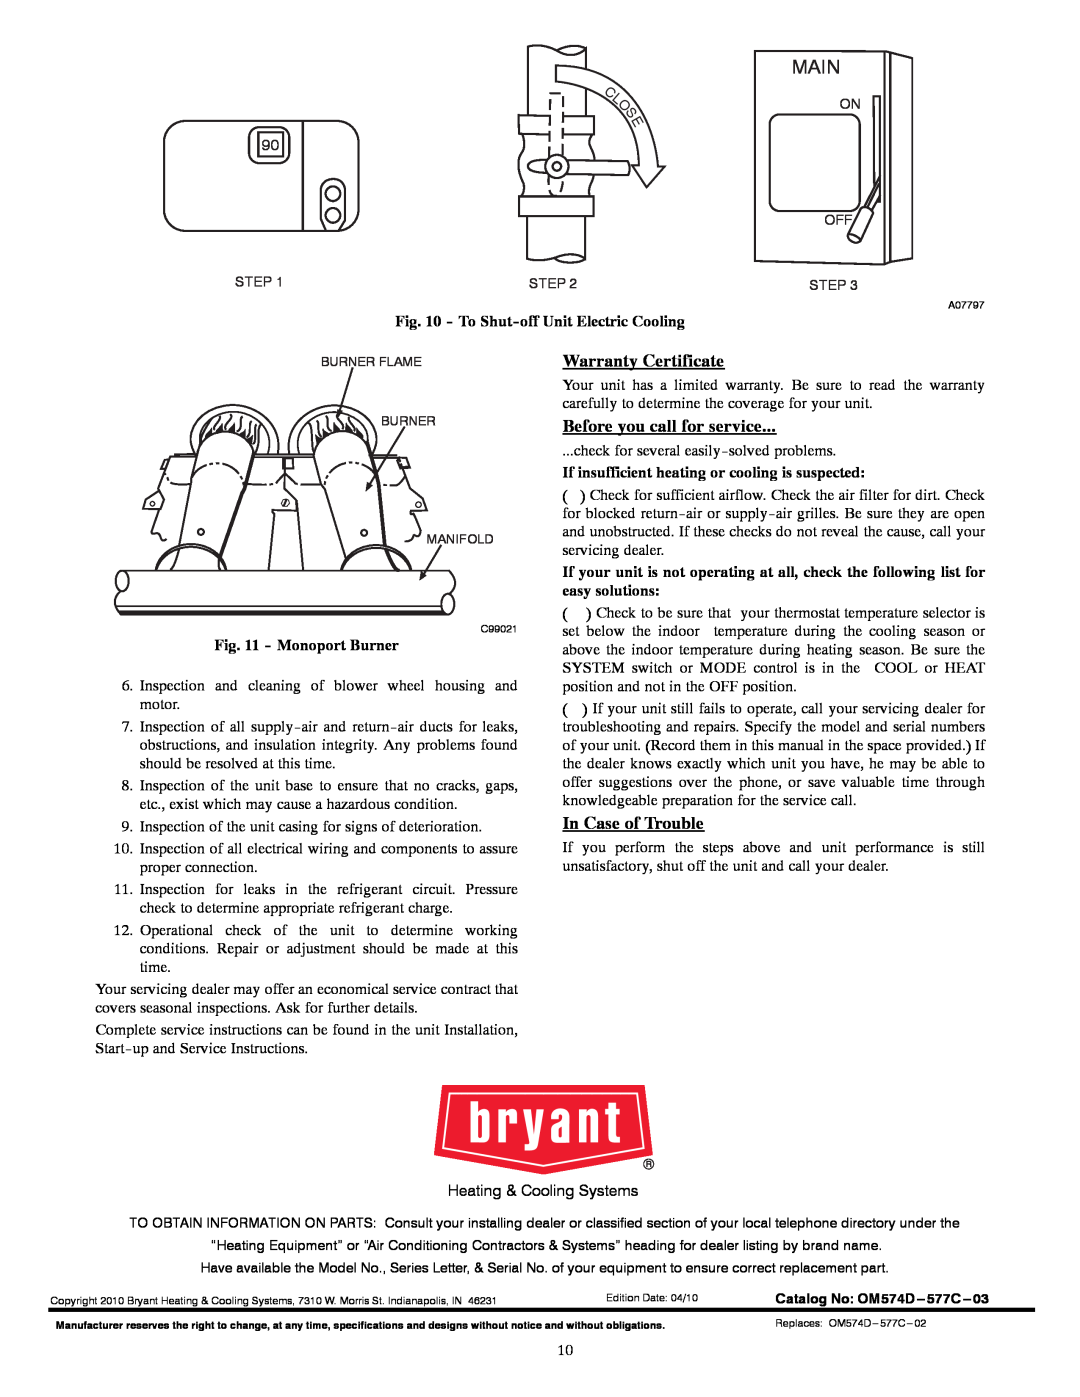 Bryant 577C, 574D C L O S E, Main, Warranty Certificate, Before you call for service, In Case of Trouble, Monoport Burner 